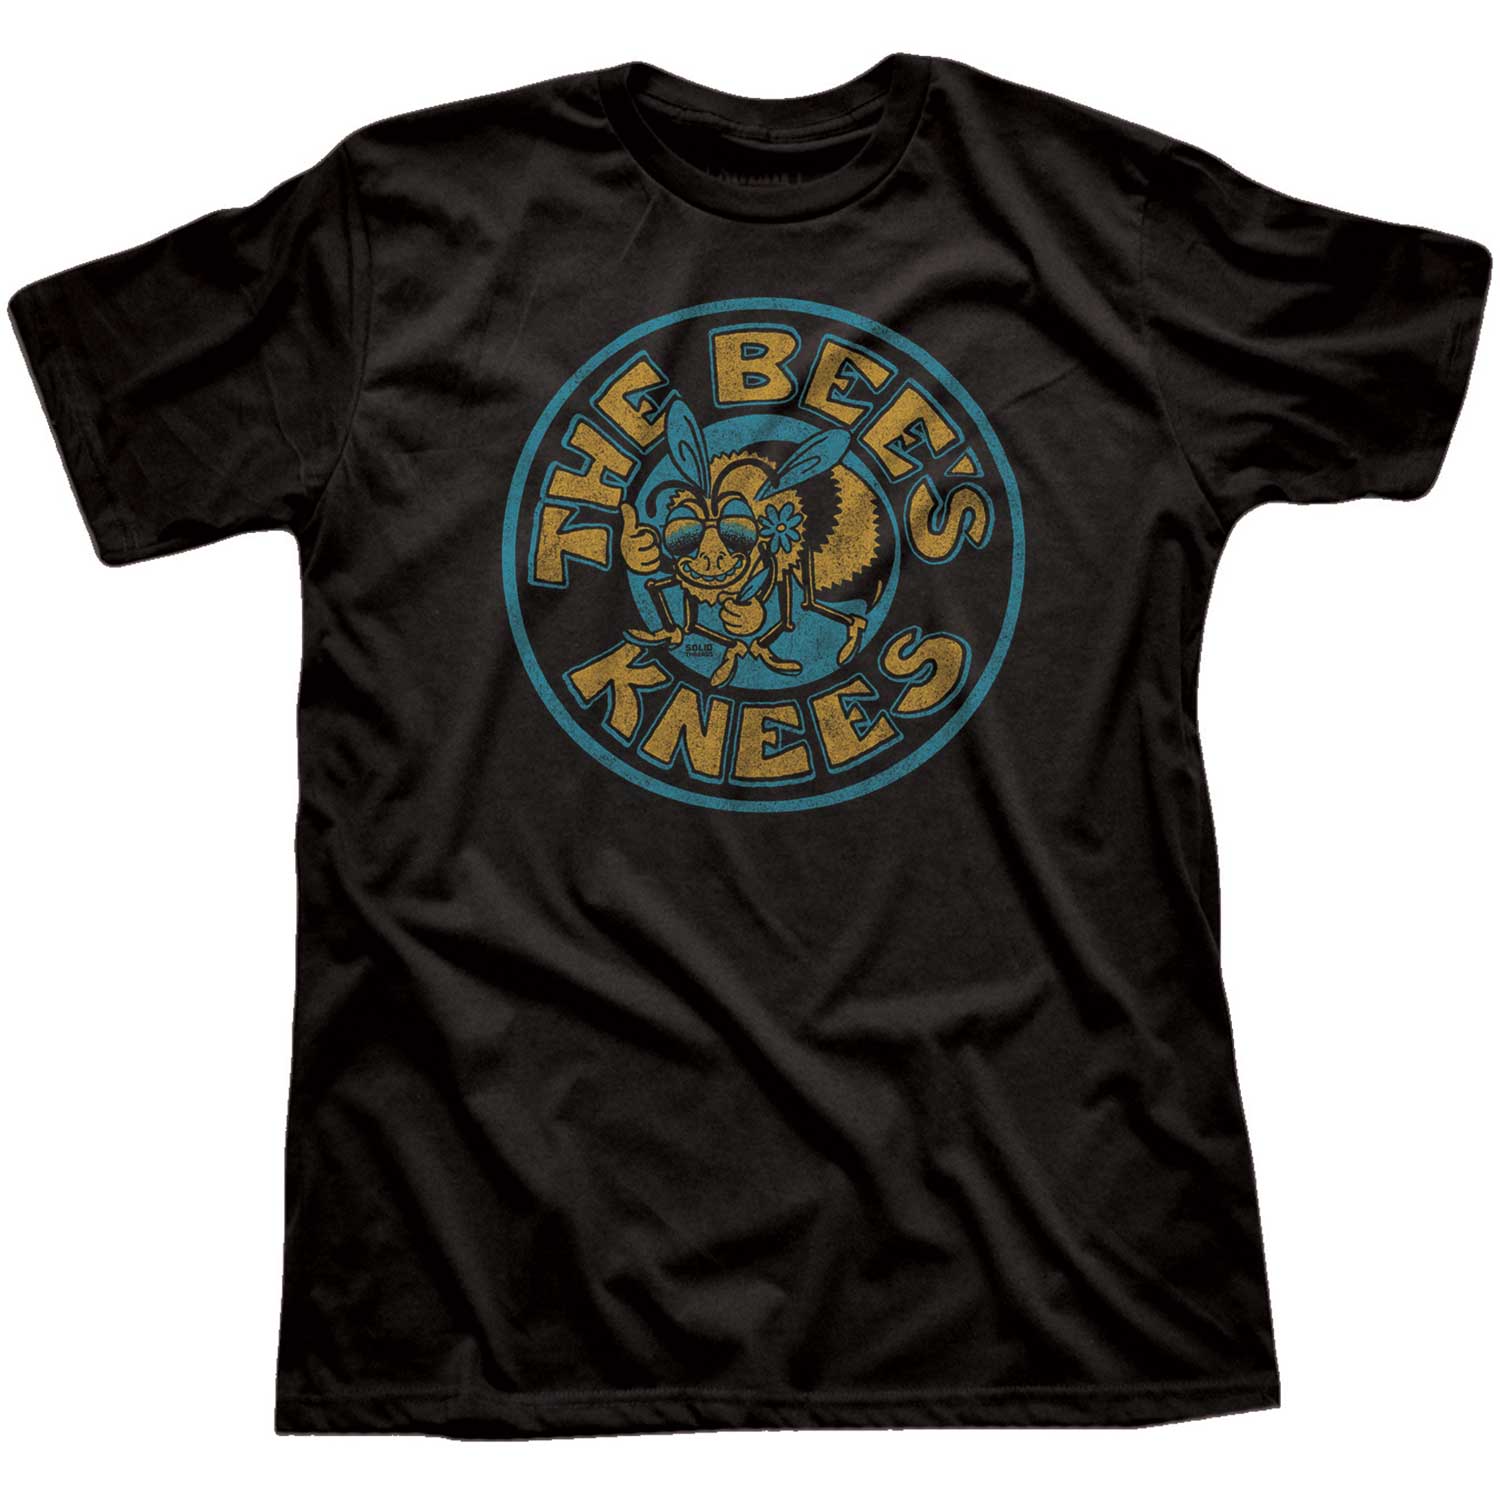 Men's The Bee's Knees Vintage Nature Graphic T-Shirt | Funny Pollinator Black Tee | Solid Threads